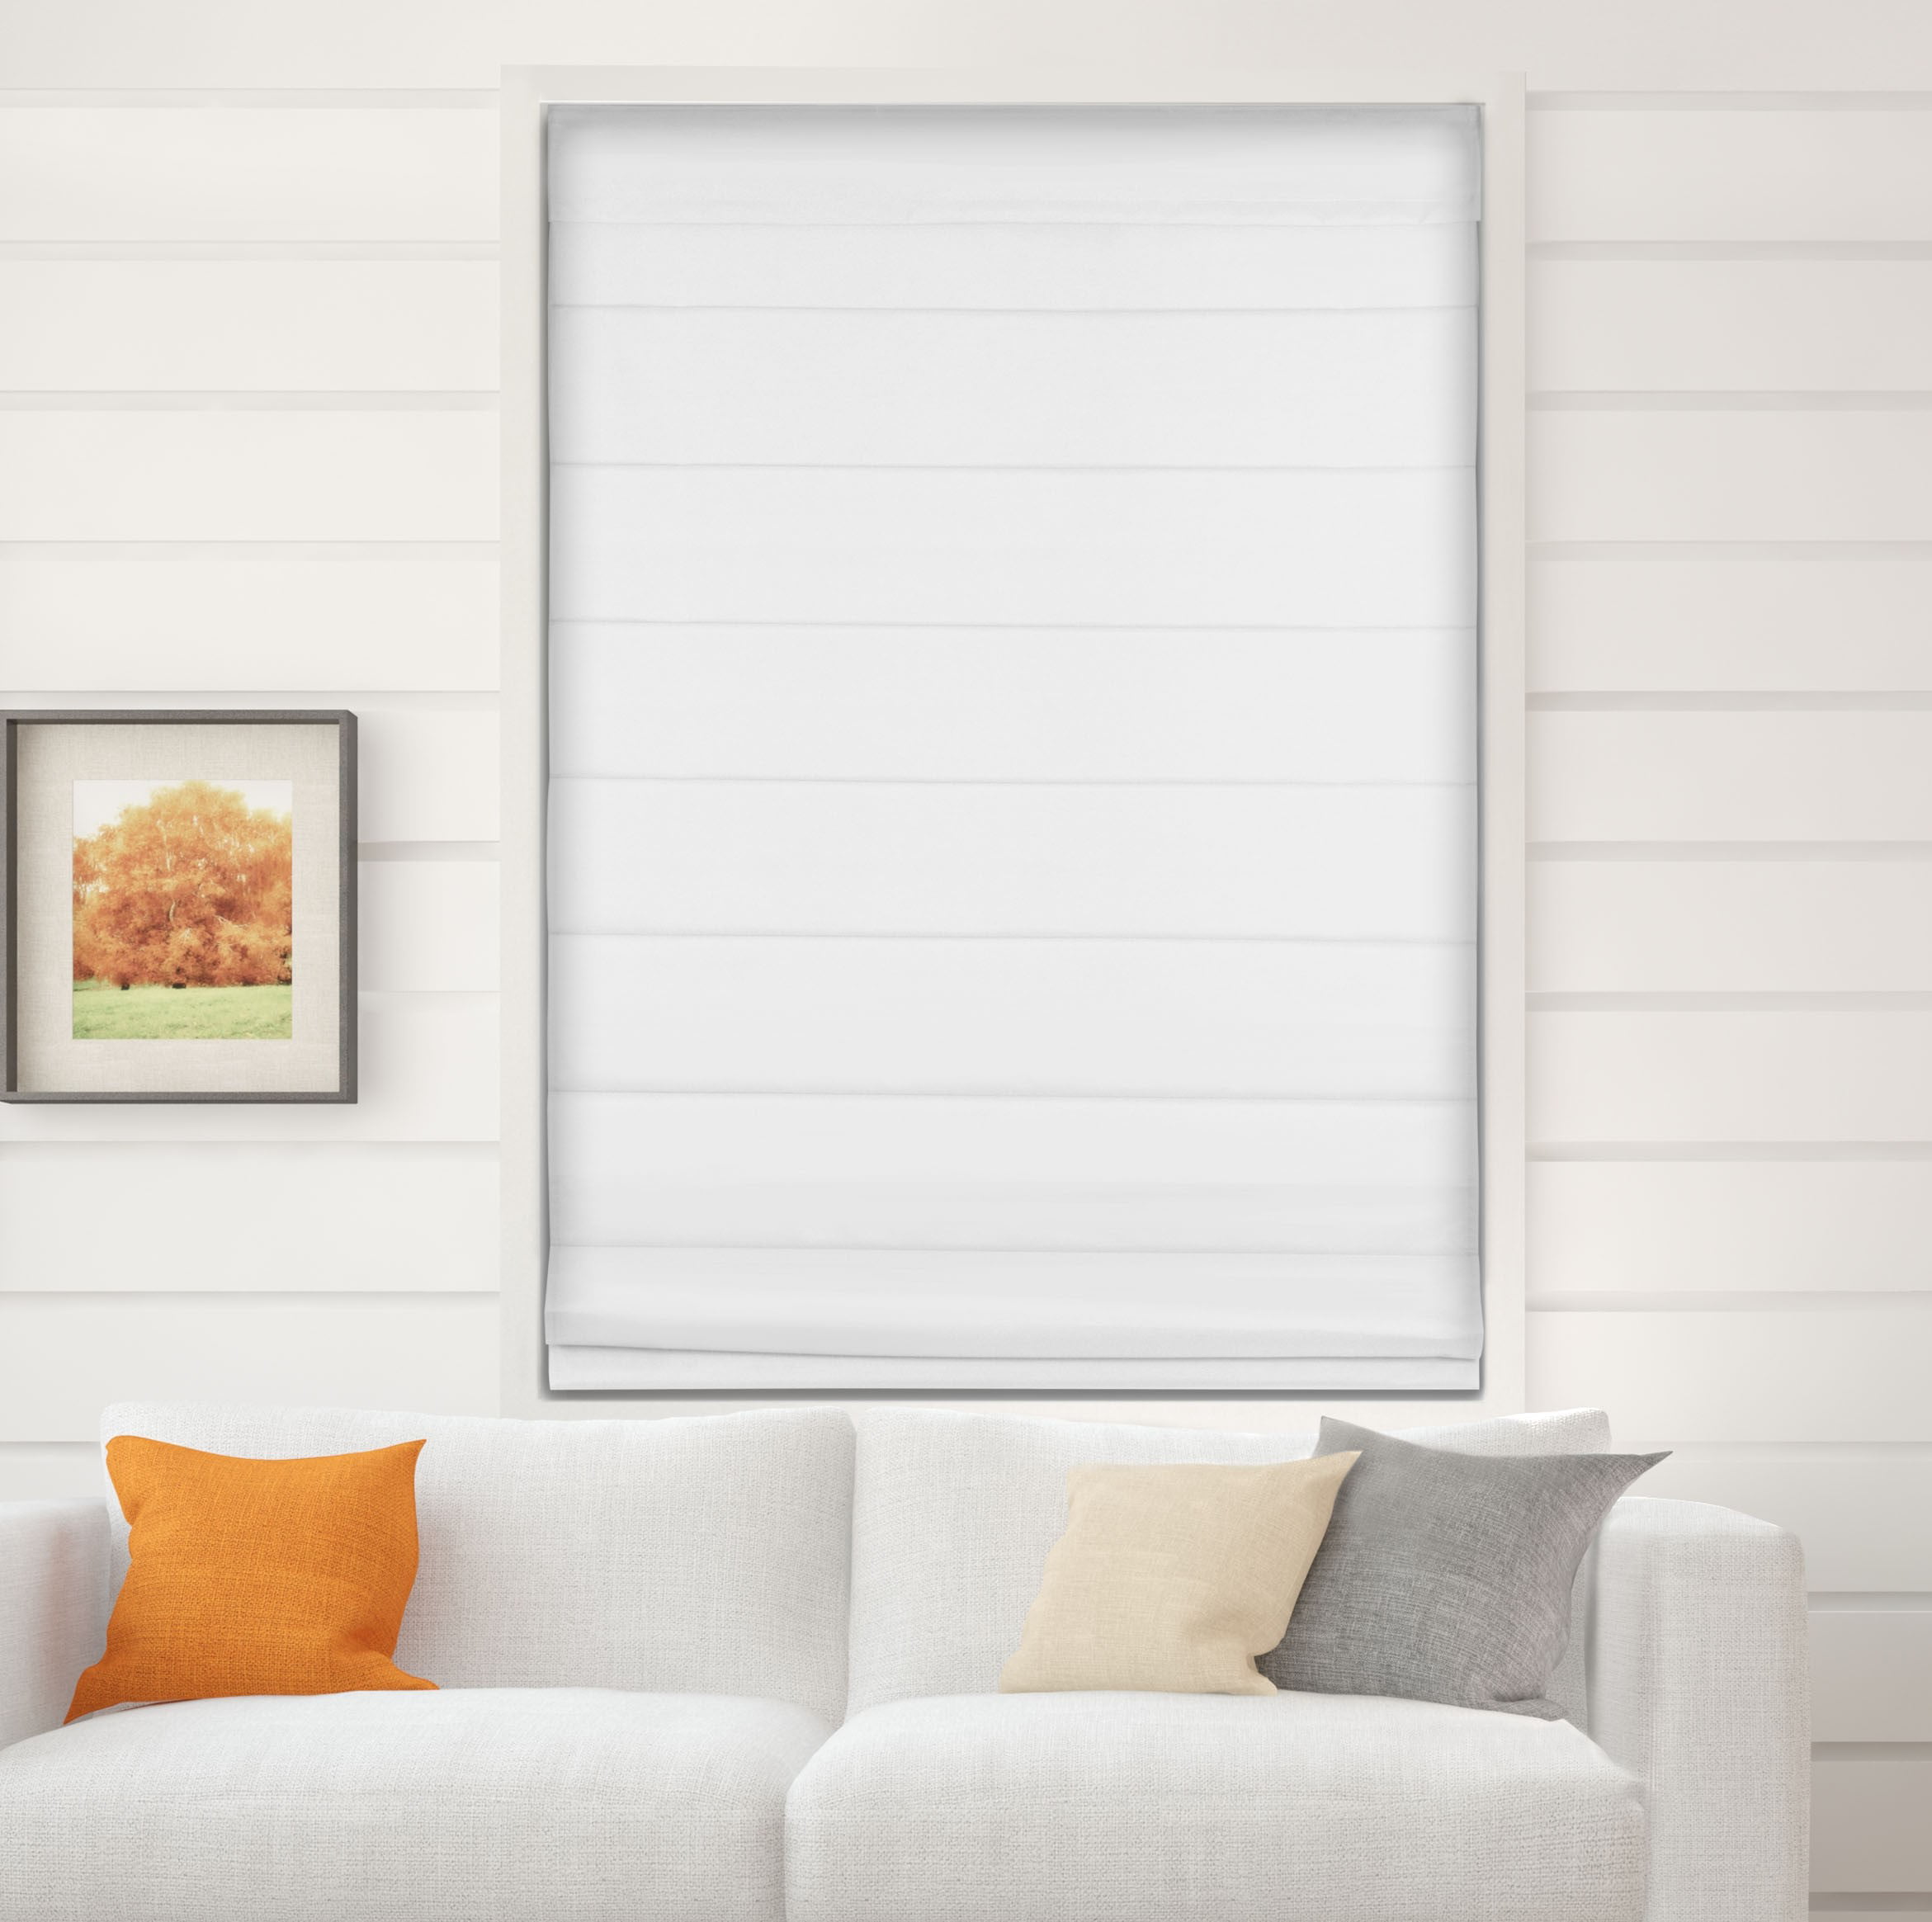 Arlo Blinds Thermal Room Darkening Cordless Fabric Roman Shades, Color White, Size 32.5"W X 72